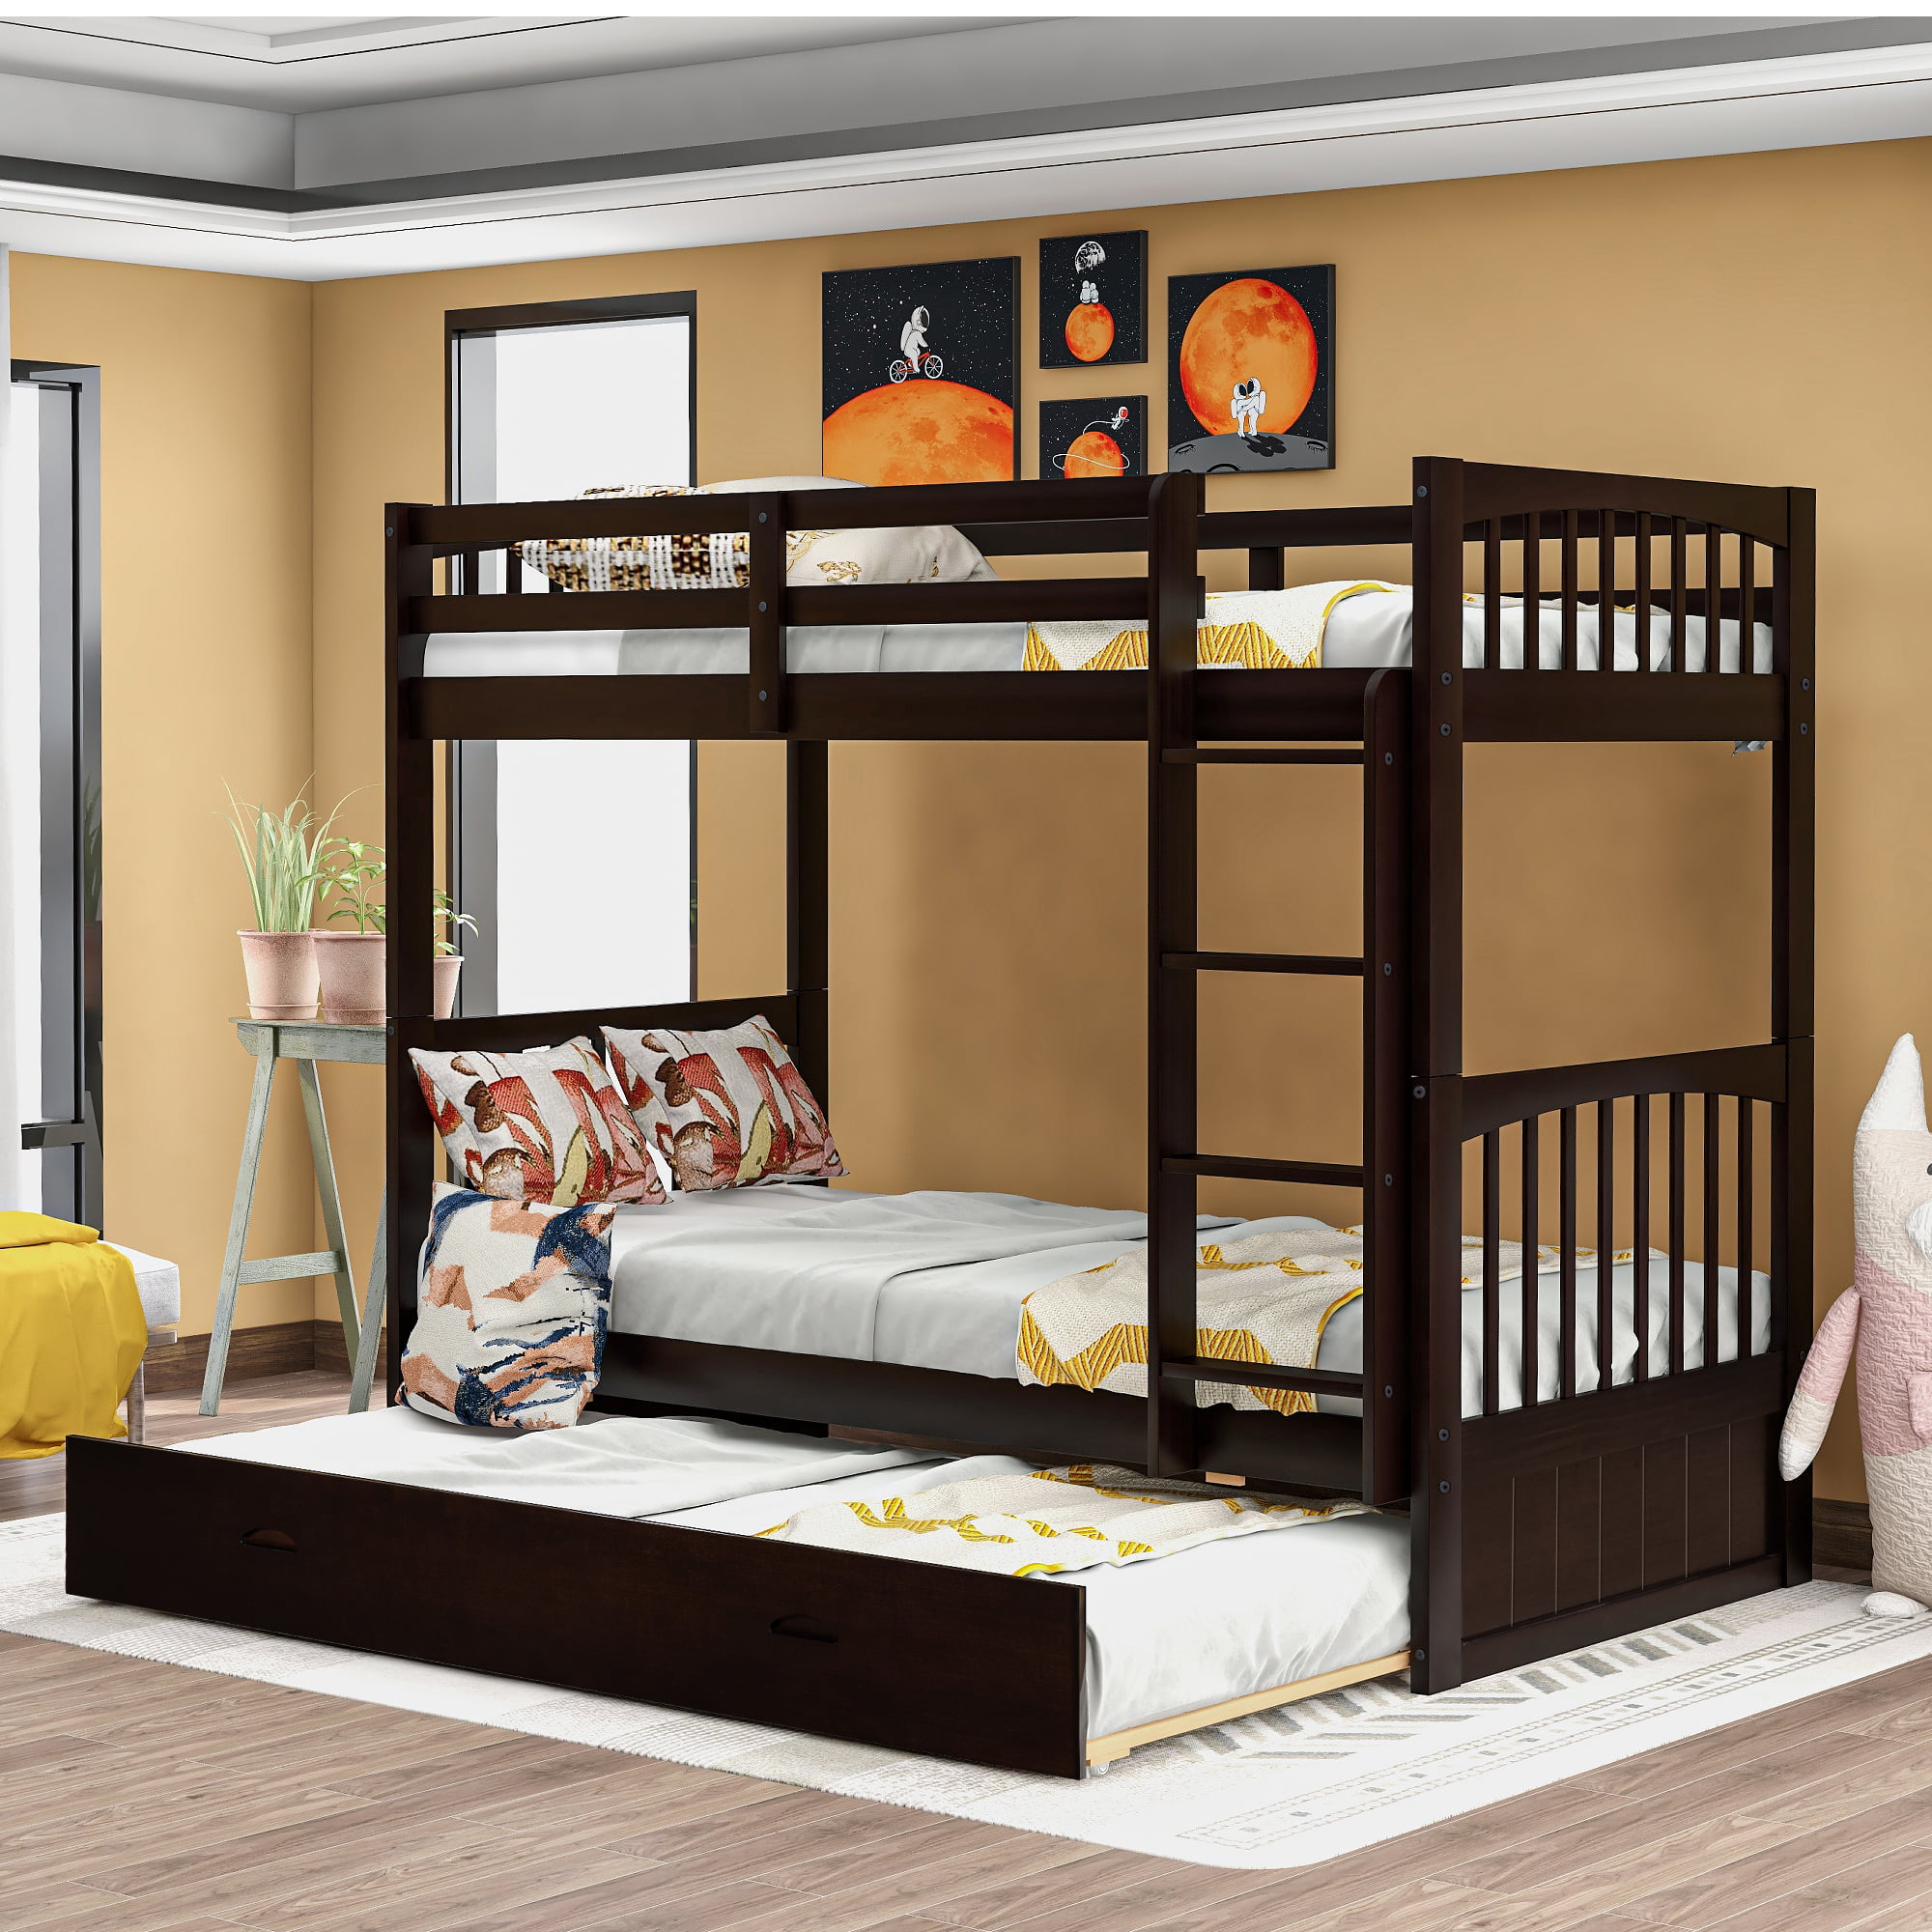 Merax Wood Bunk Bed Twin Over, Paw Patrol Bunk Beds